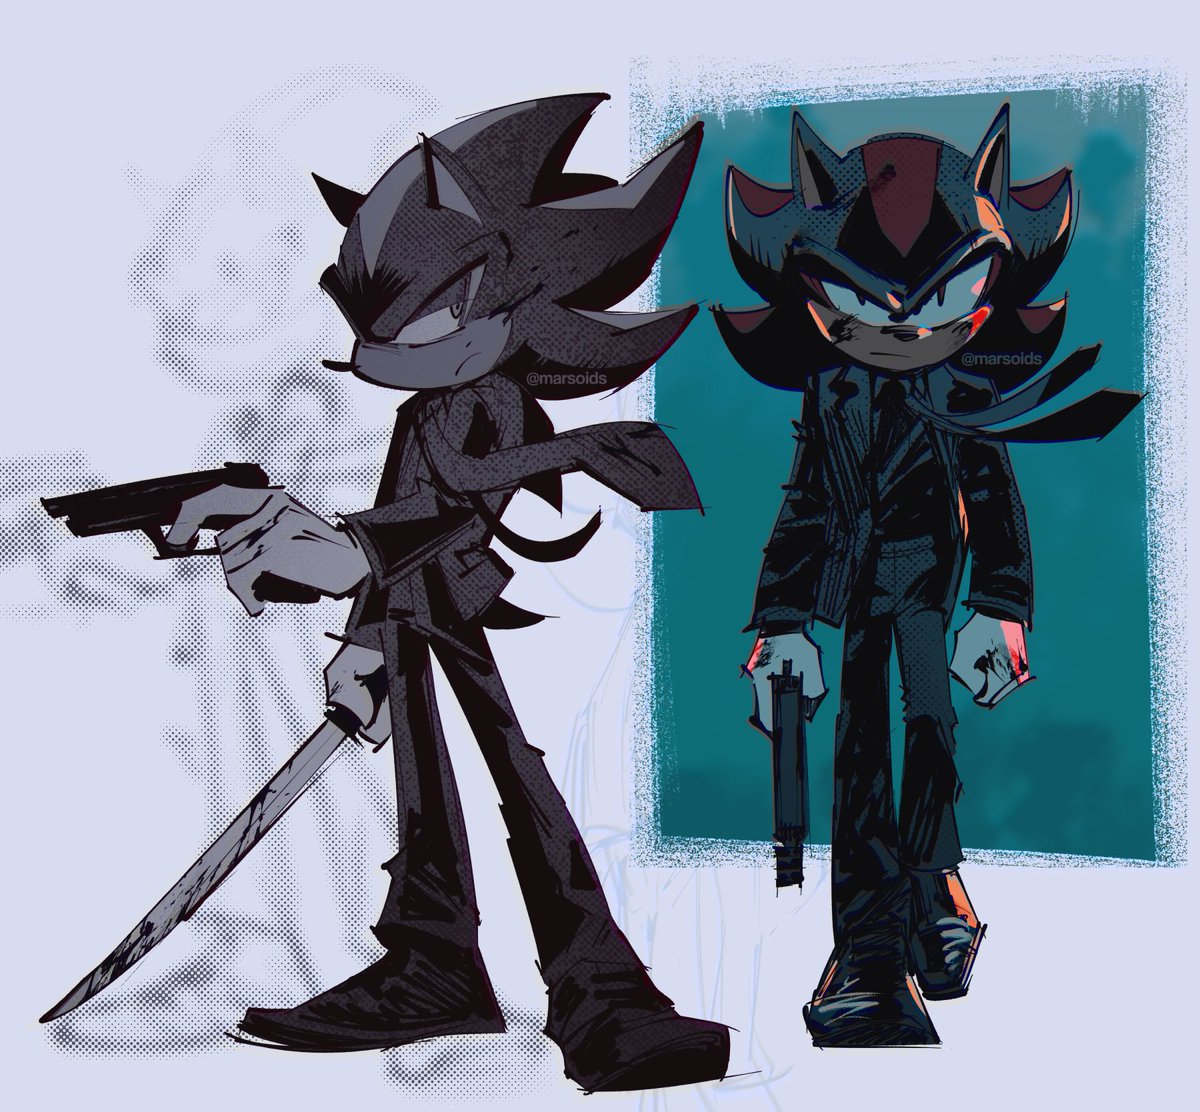 Shadow the hedgehog confirmed starring role in next John Wick movie